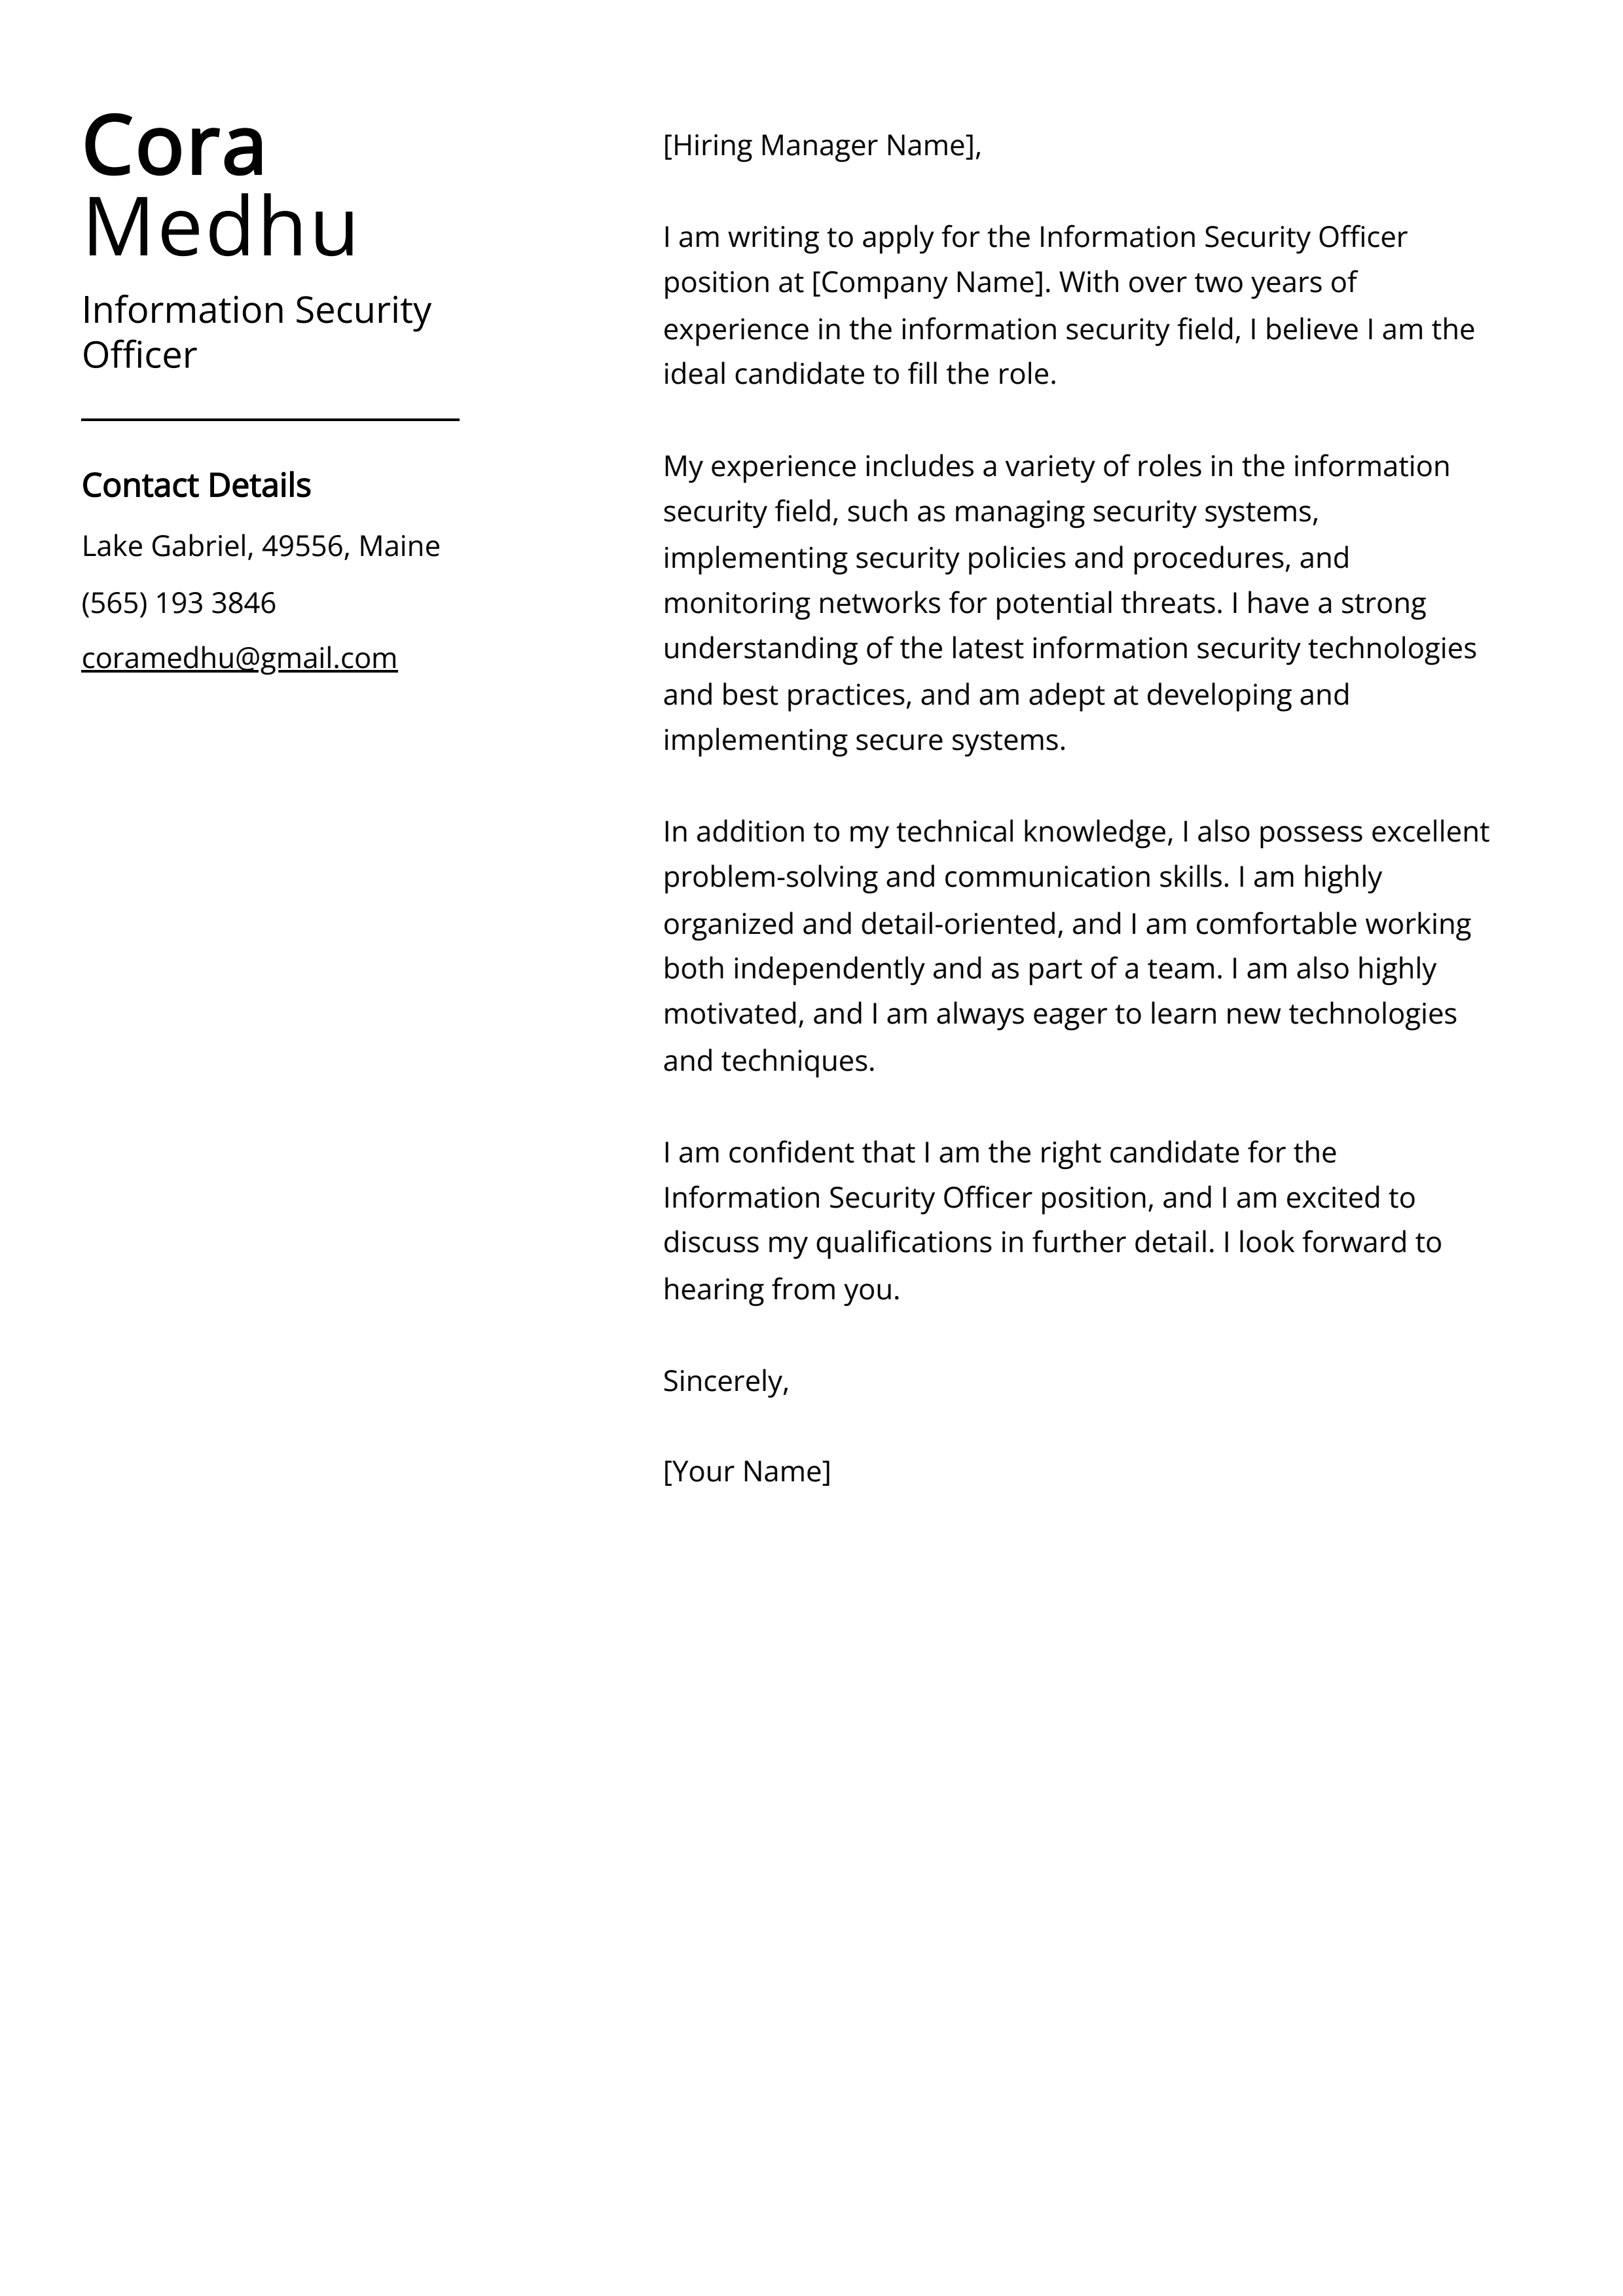 Information Security Officer Cover Letter Example